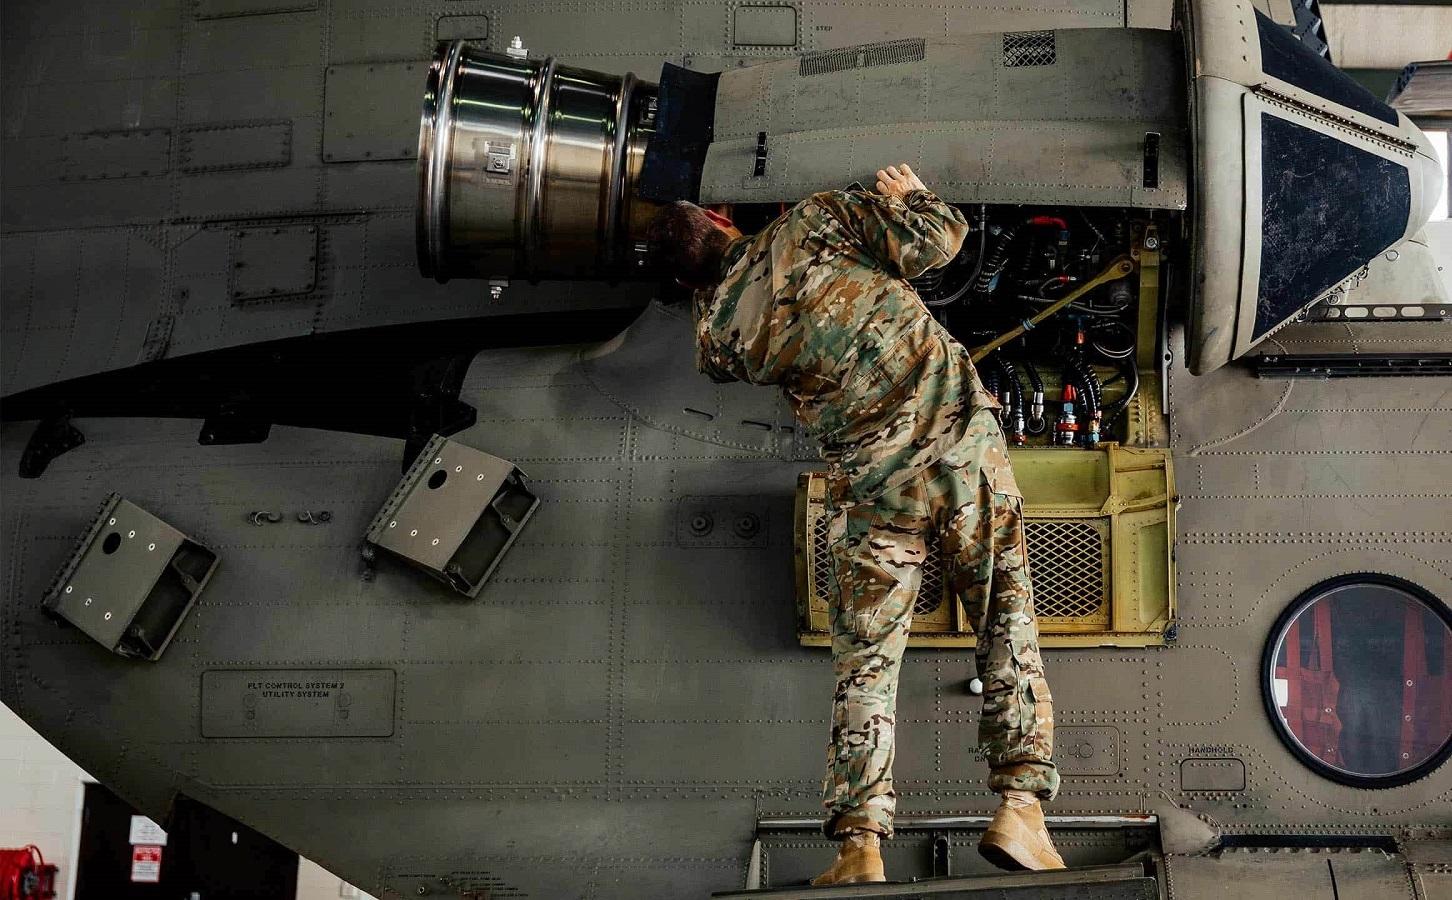 To date, more than 6,000 T55 engines have been produced, logging some 12 million hours of operation on the Boeing CH-47 Chinook and MH-47 helicopters.